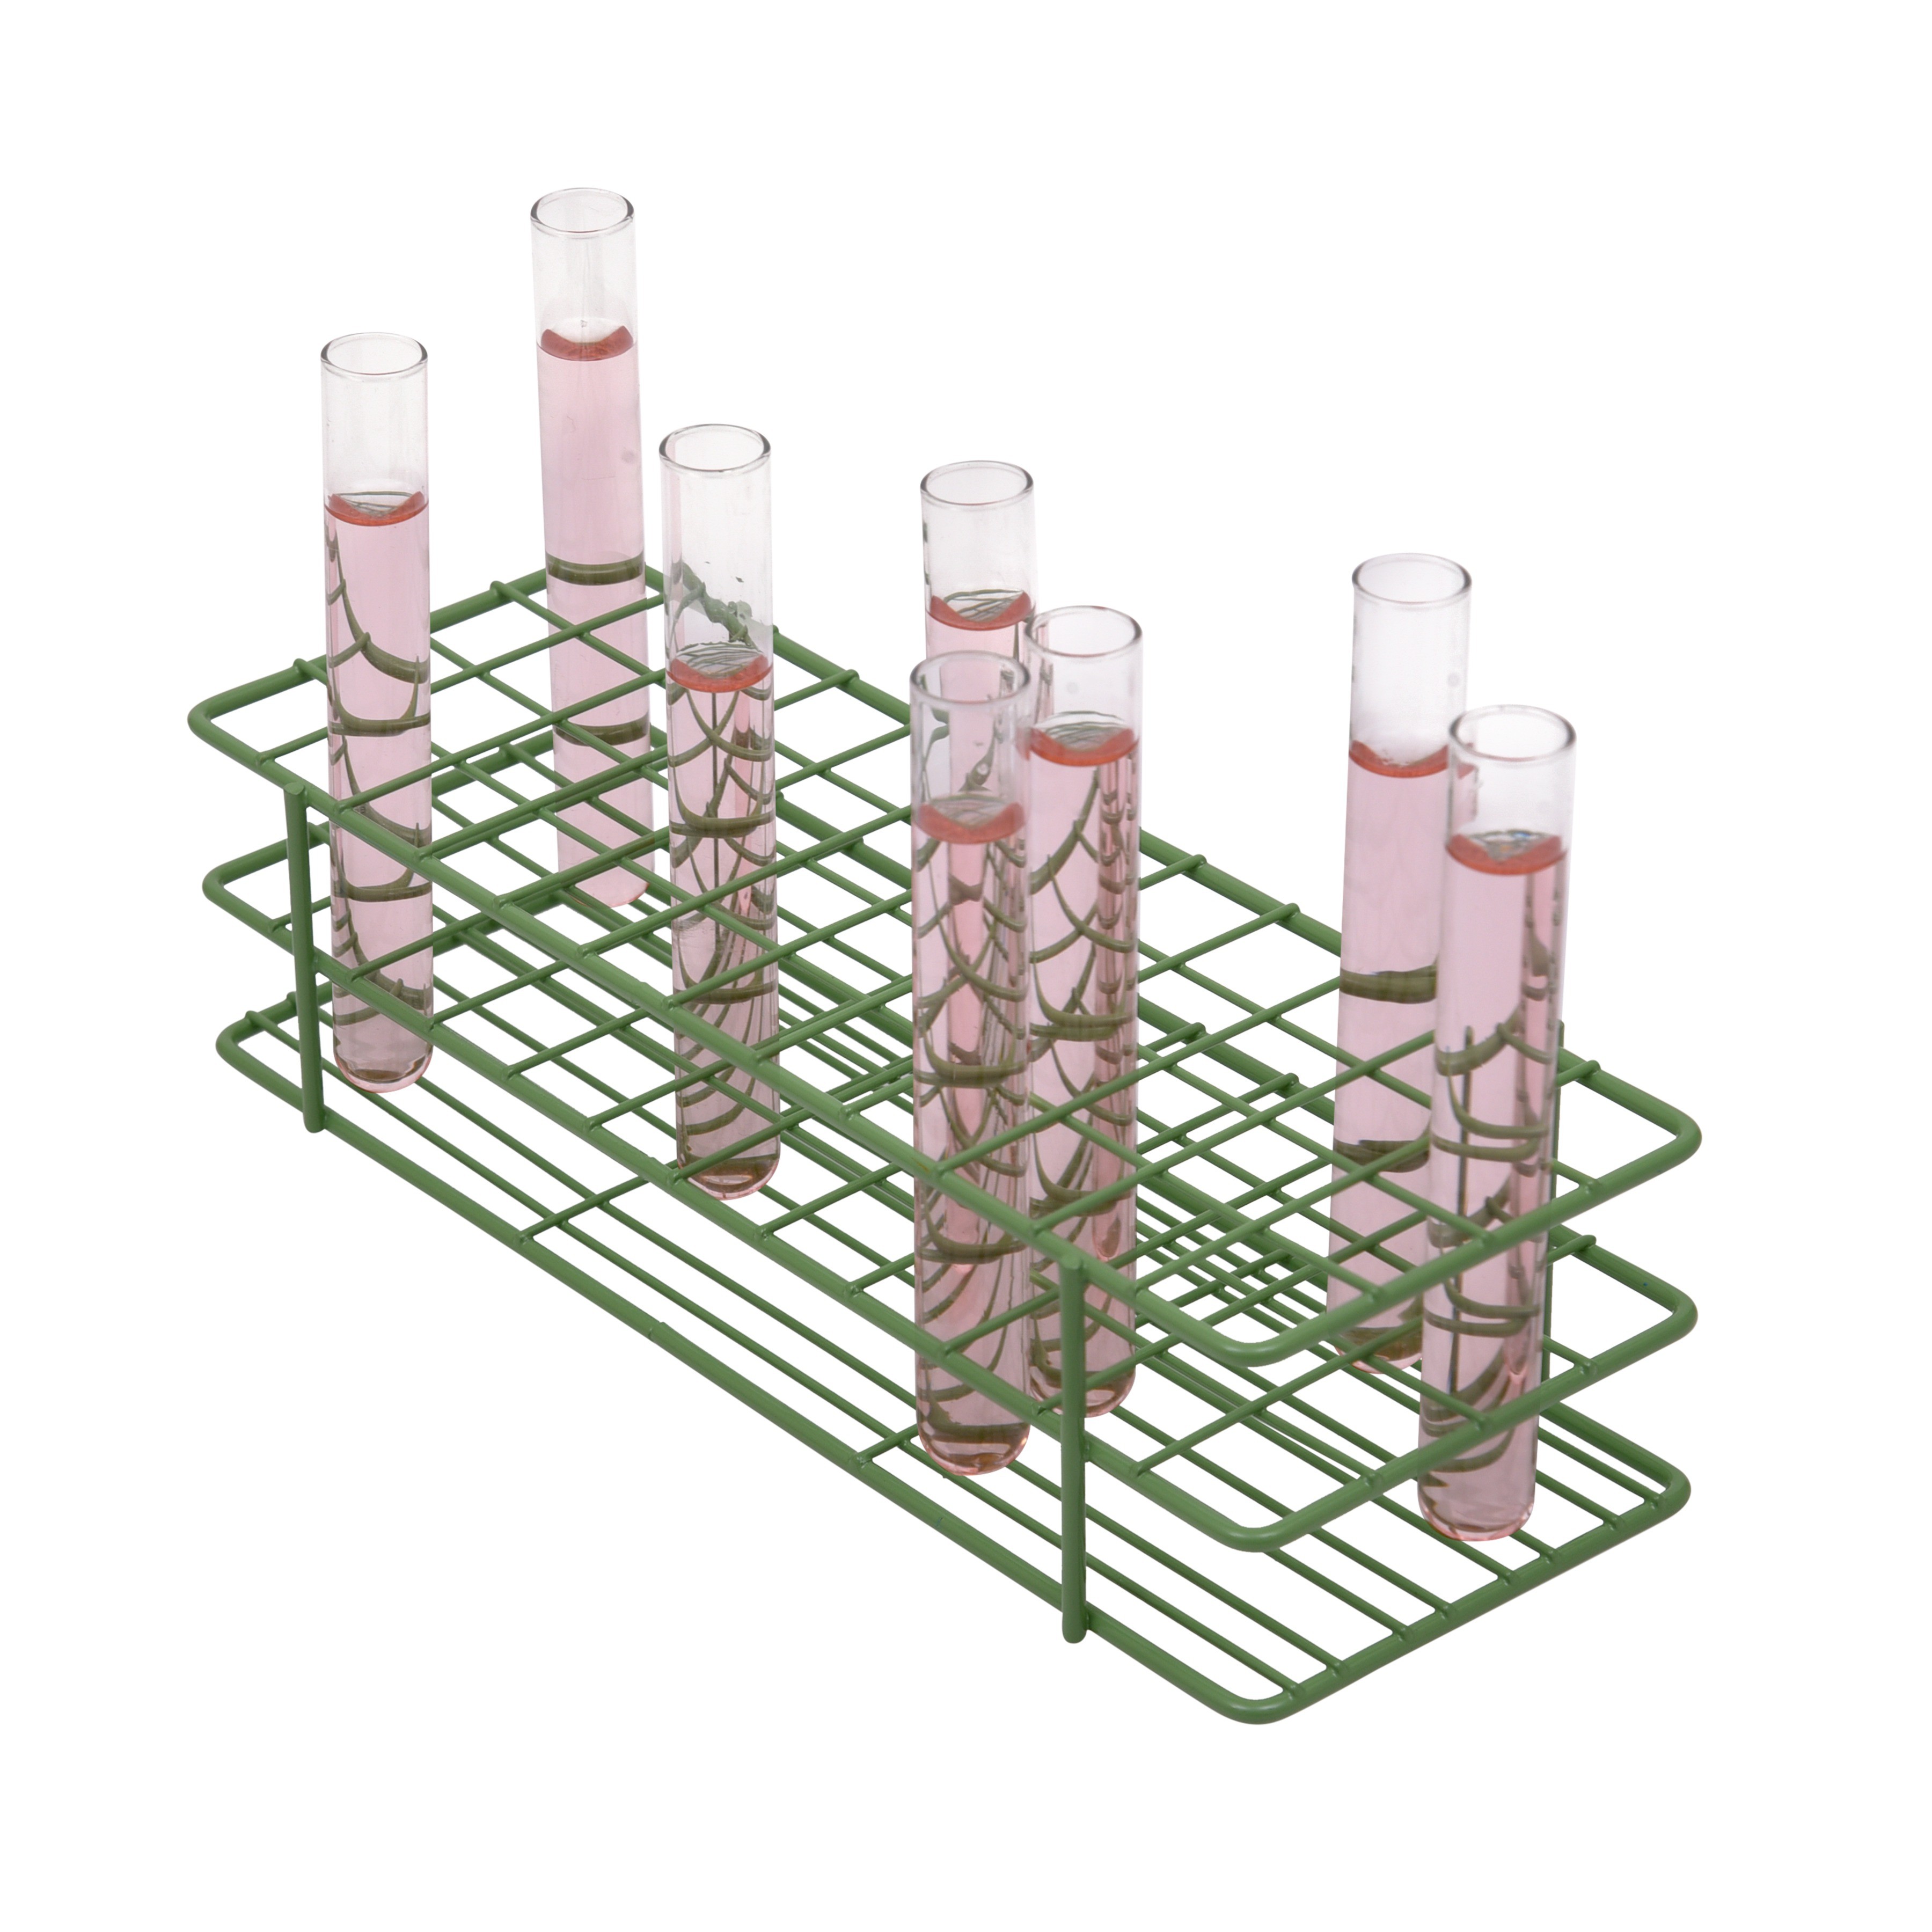 SP Bel-Art Poxygrid Test Tube Rack; For 13-16mm Tubes, 48 Places, Green